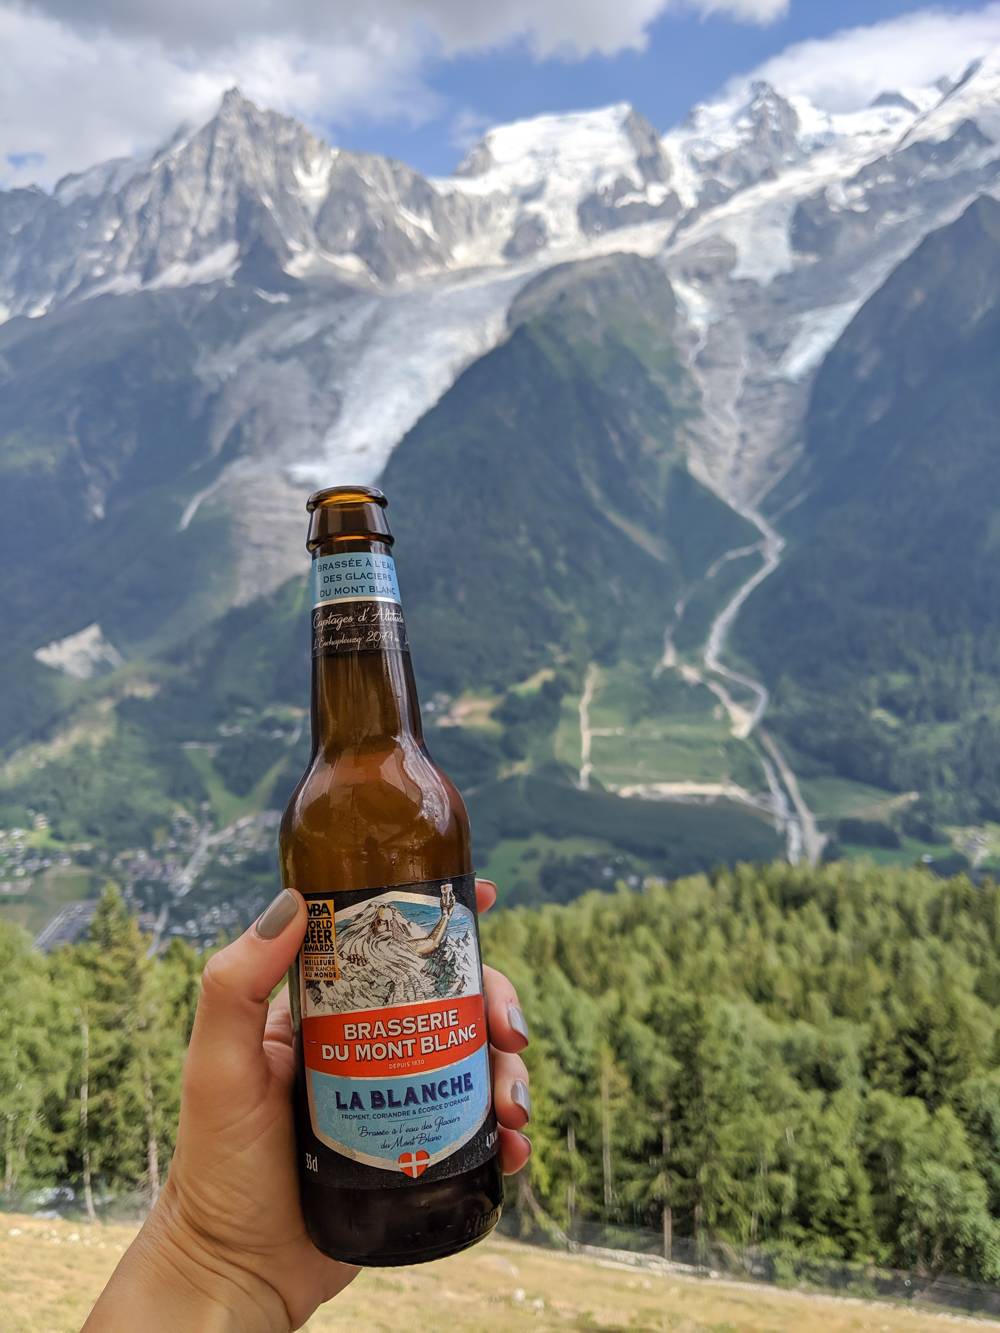 Awesome things to do in Chamonix in the summer: Alpine bucket list / Brasserie du Mont Blanc beer blanche